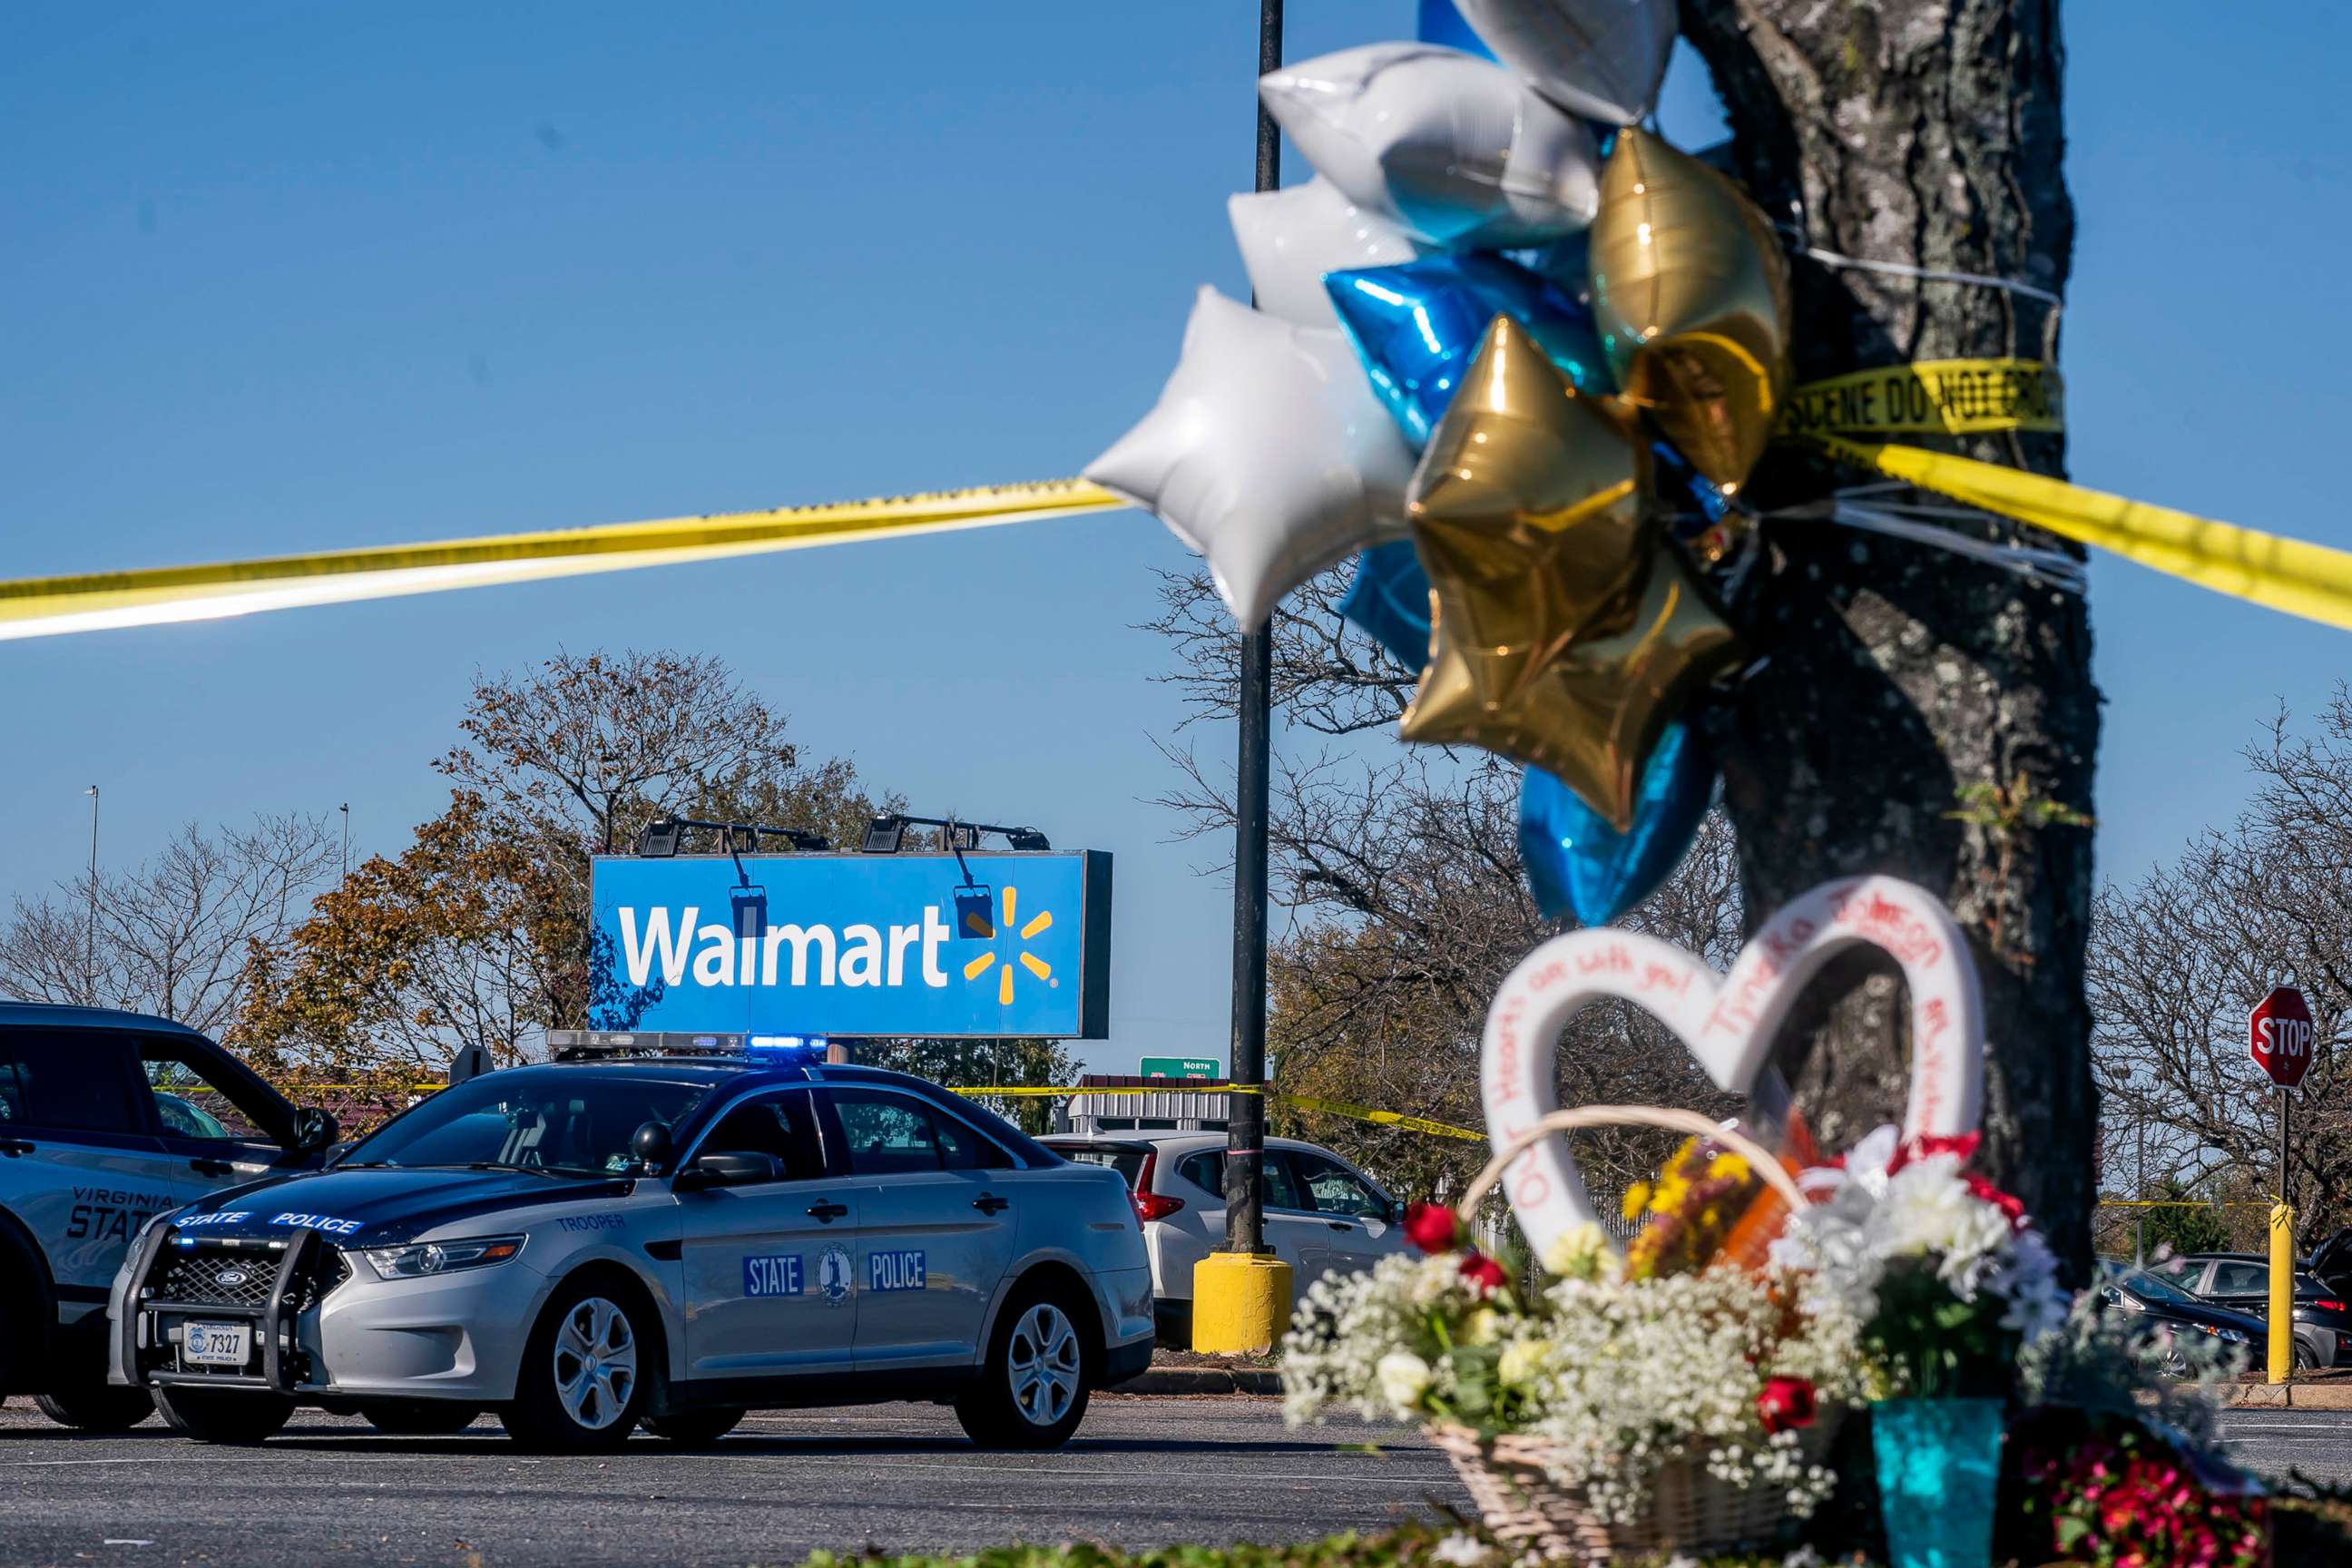 PHOTO: A memorial is seen at the site of a fatal shooting in a Walmart, Nov. 23, 2022 in Chesapeake, Virginia.